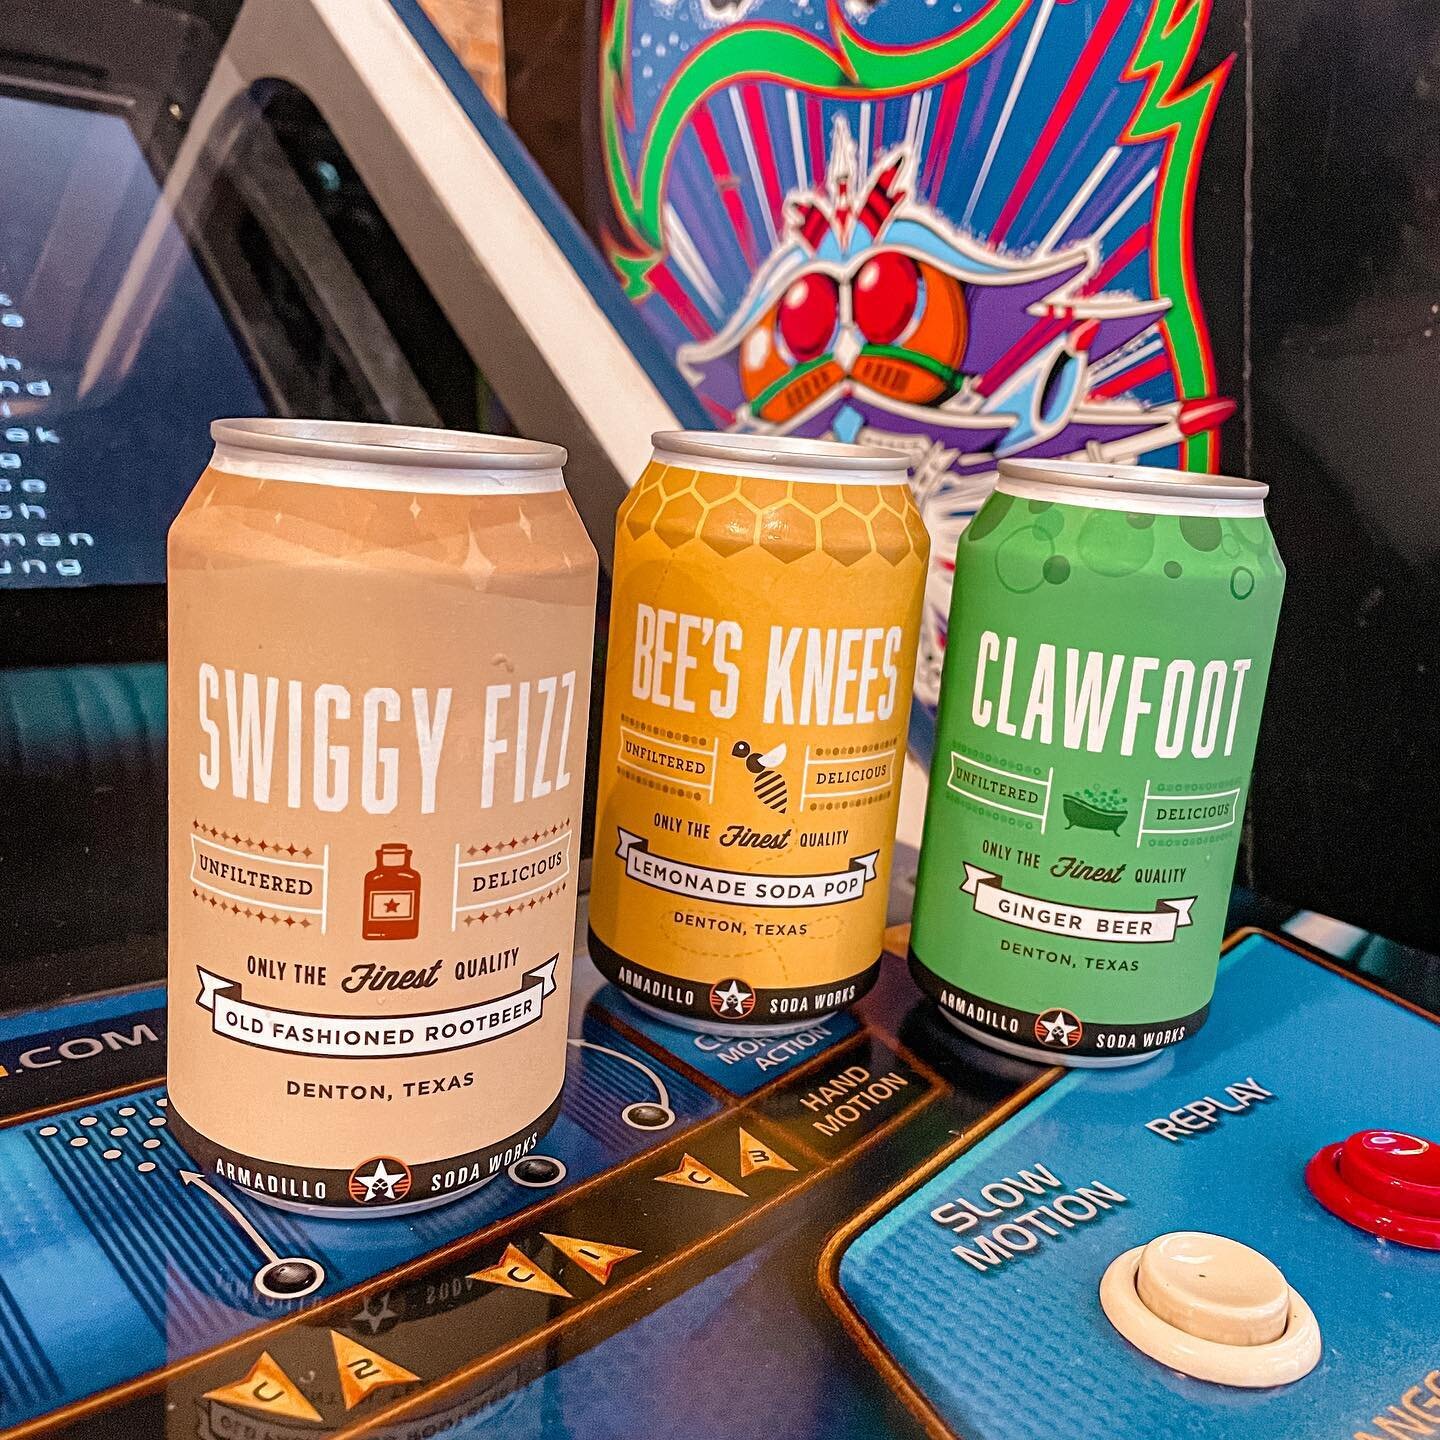 The gang&rsquo;s all back together! We have all 3 of our delicious old fashioned sodas in stock to enjoy in the taproom or to take home &hearts;️ 
🐝 Bee&rsquo;s Knees: Lemonade Soda Pop
🛁 Clawfoot: Ginger Beer
🥤 Swiggy Fizz: Old Fashioned Root Beer